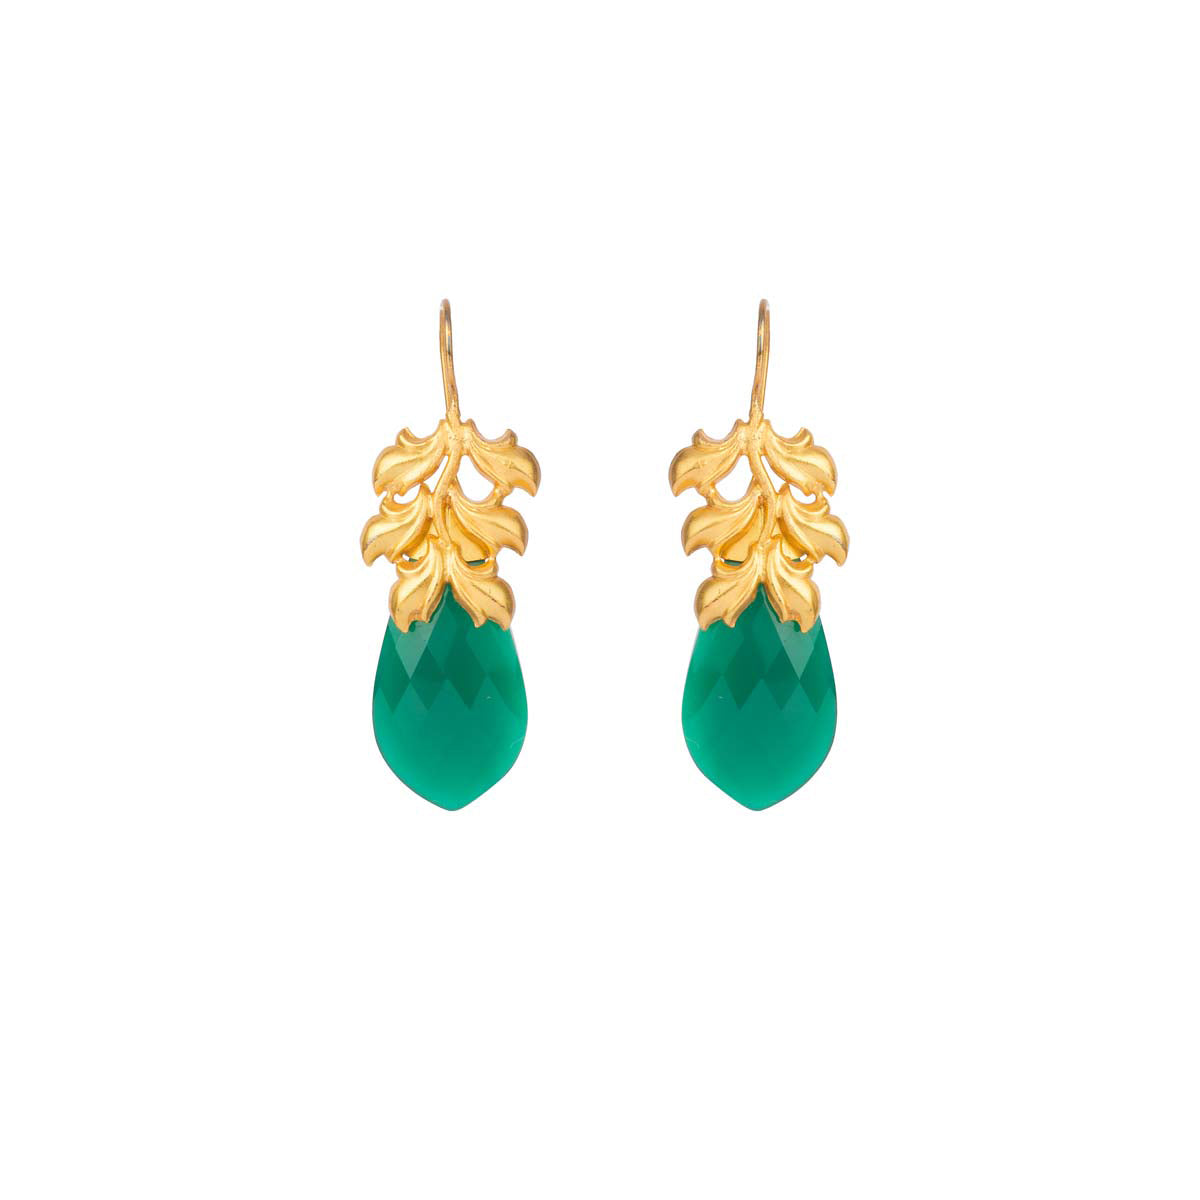 Stay evergreen, always with these irresistible gold-plated earrings finished with a large green stone.